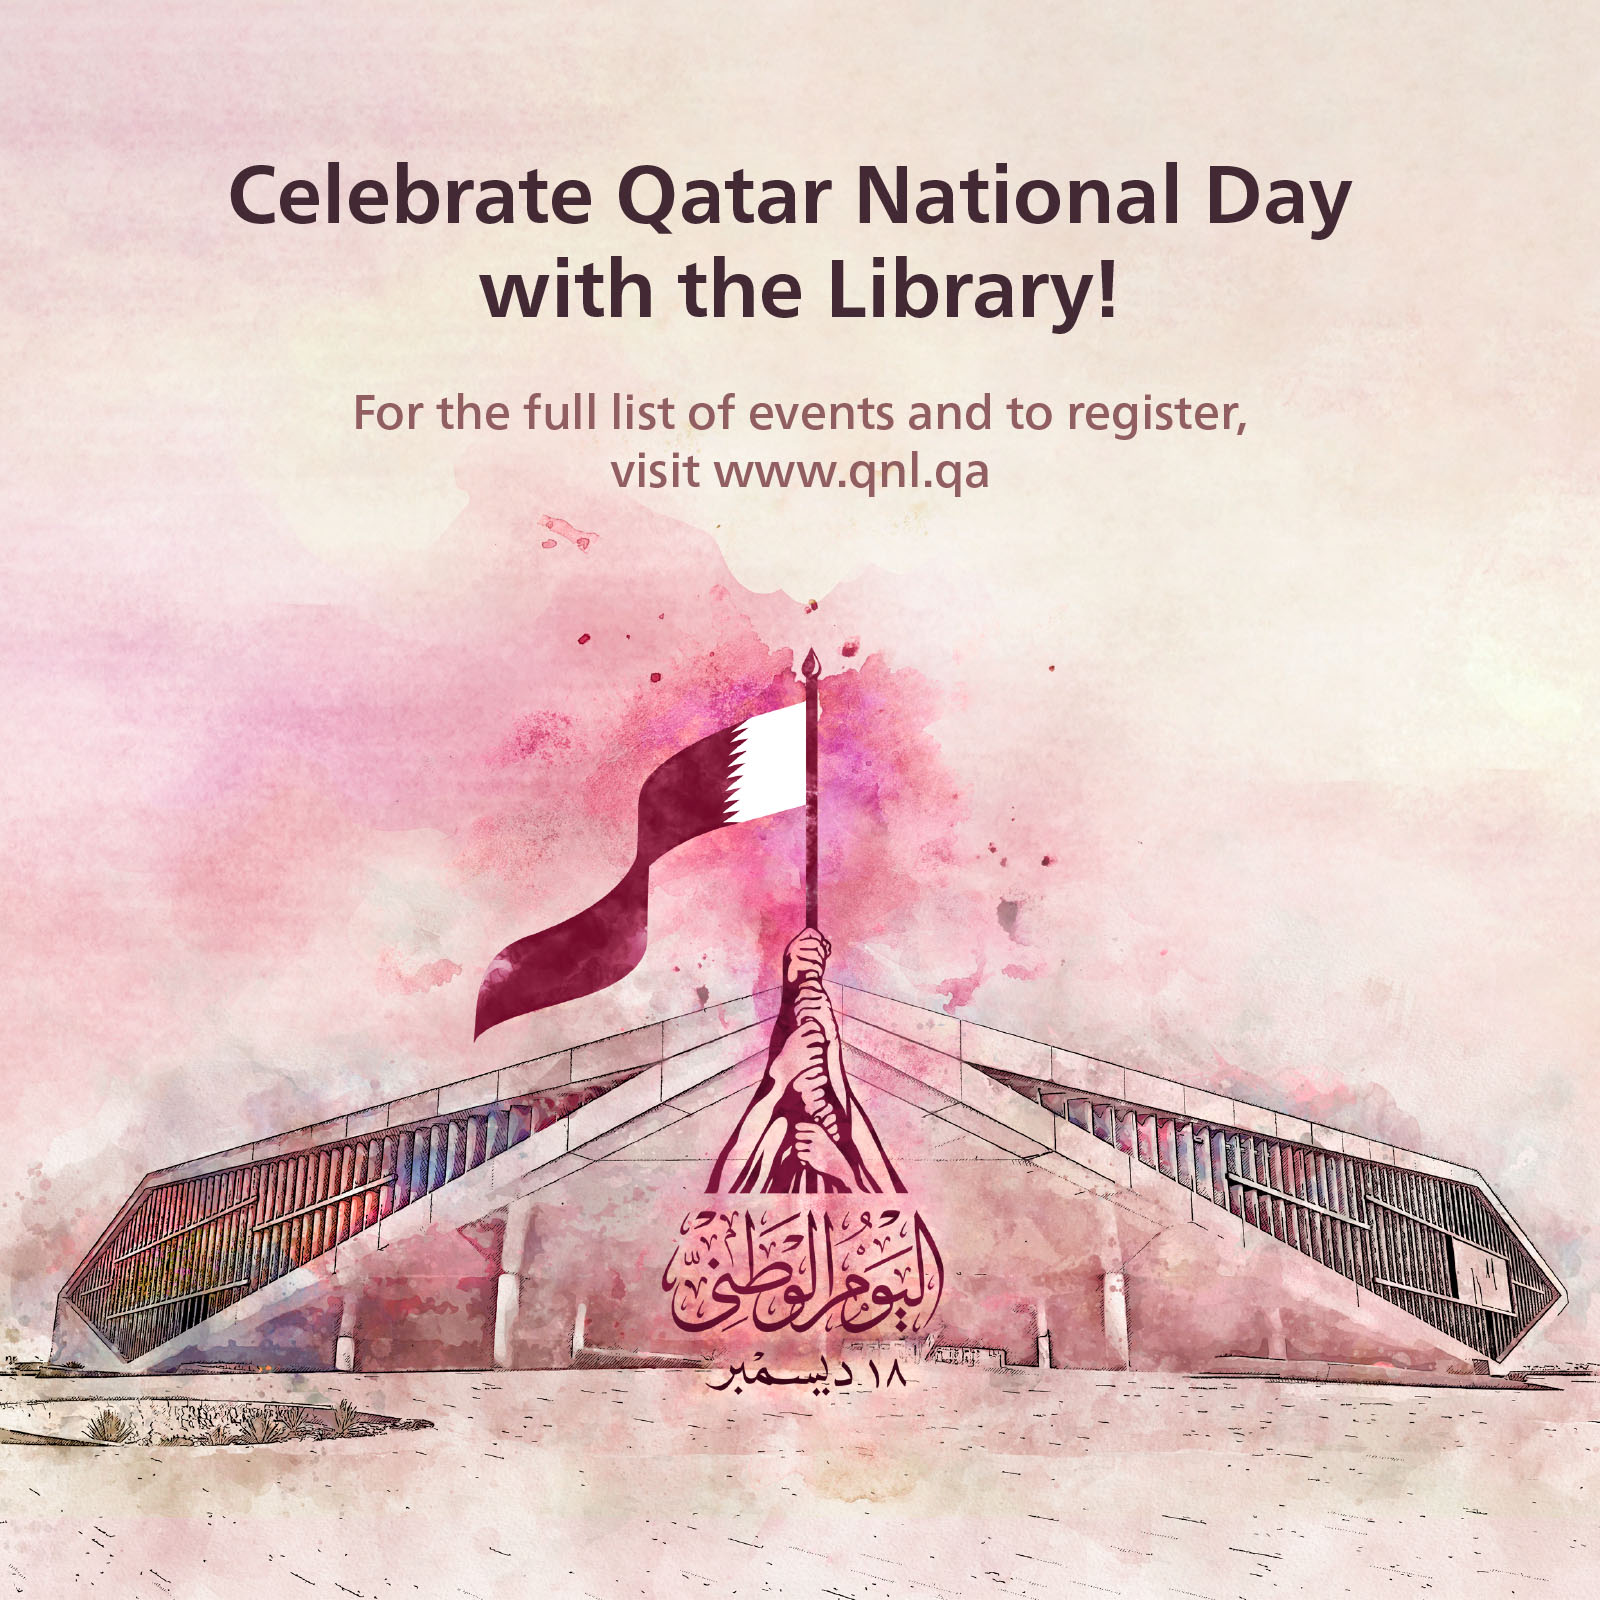 Celebrate Qatar National Day with us!